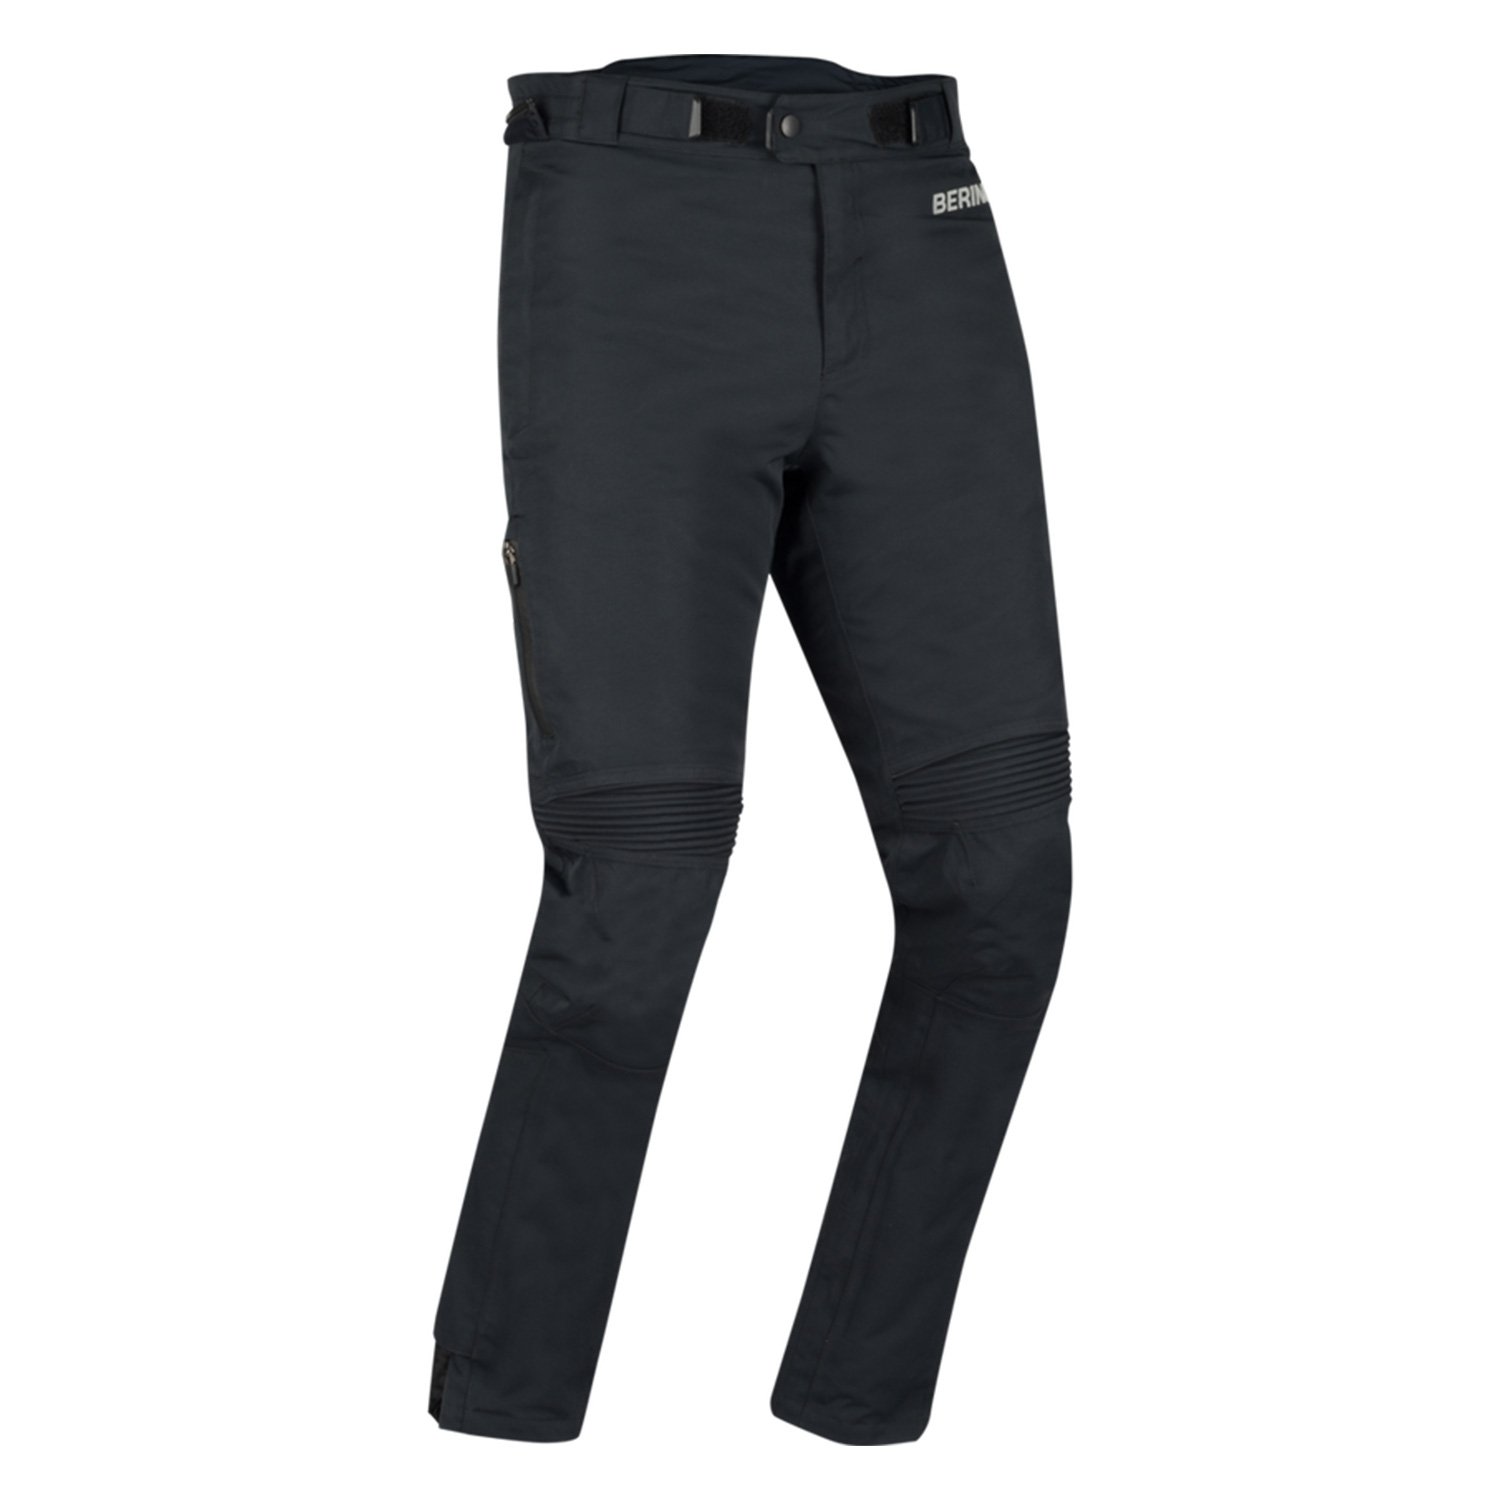 Image of Bering Zephyr Trousers Black Taille 3XL